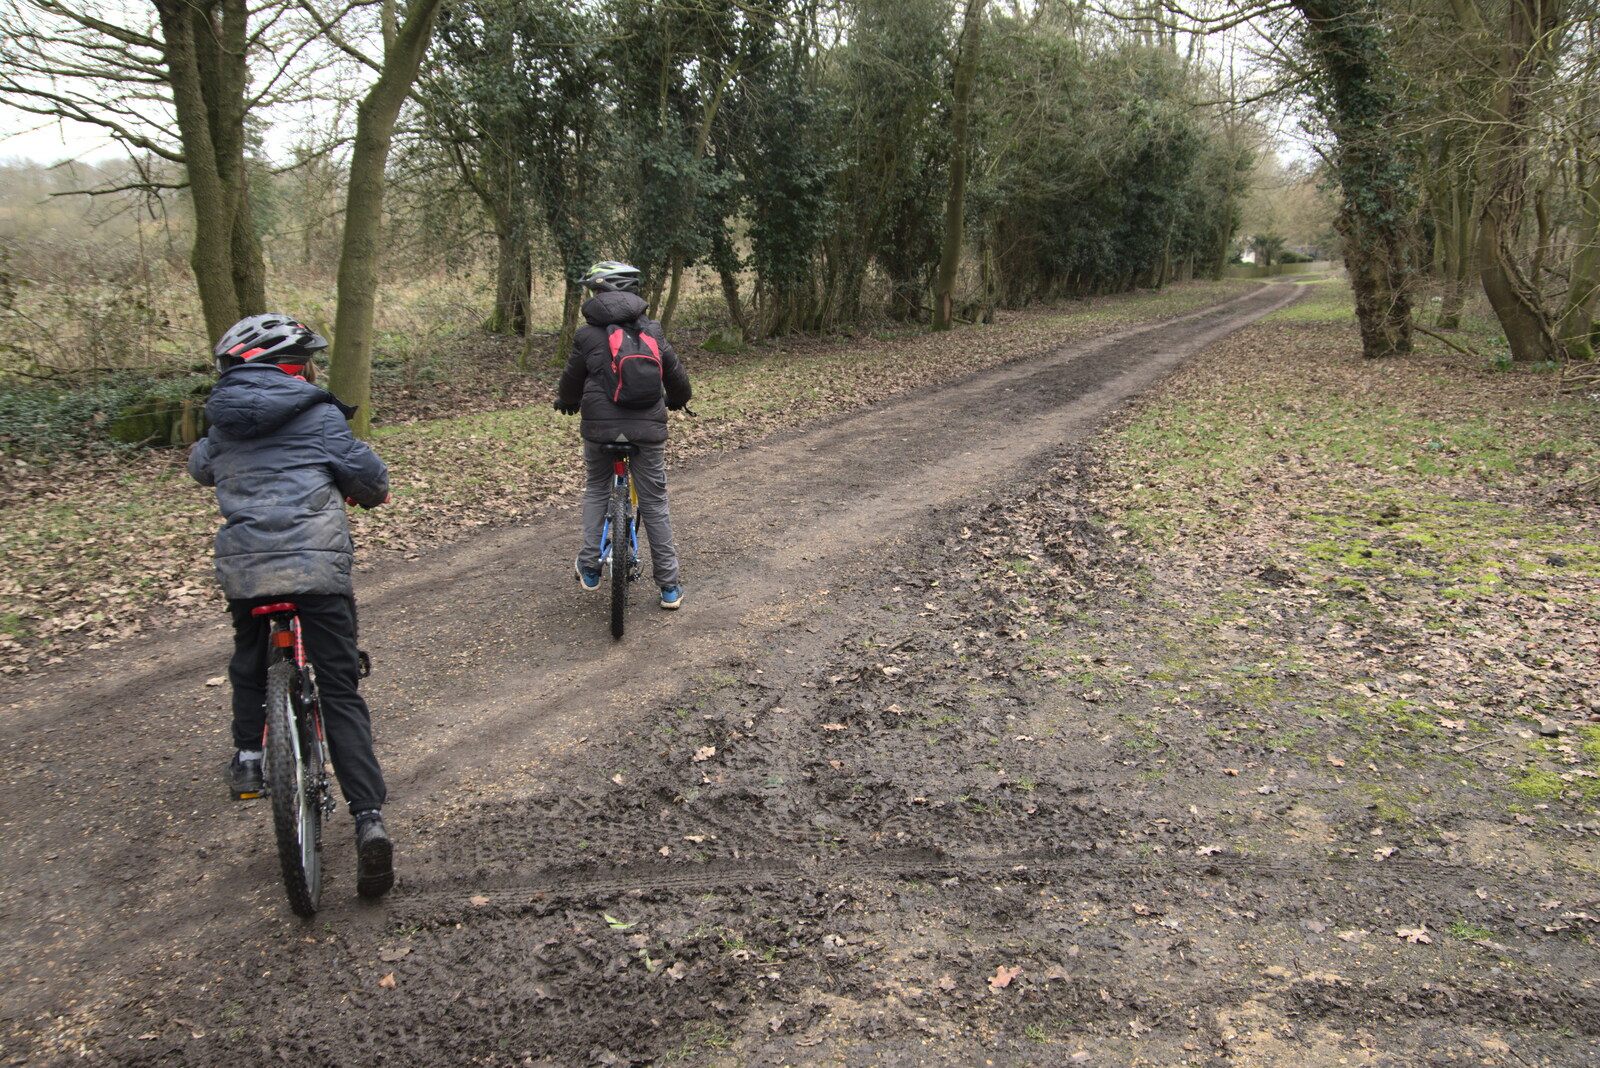 The boys are back on Brome Avenue from The Old Sewage Works, The Avenue, Brome, Suffolk - 20th February 2021